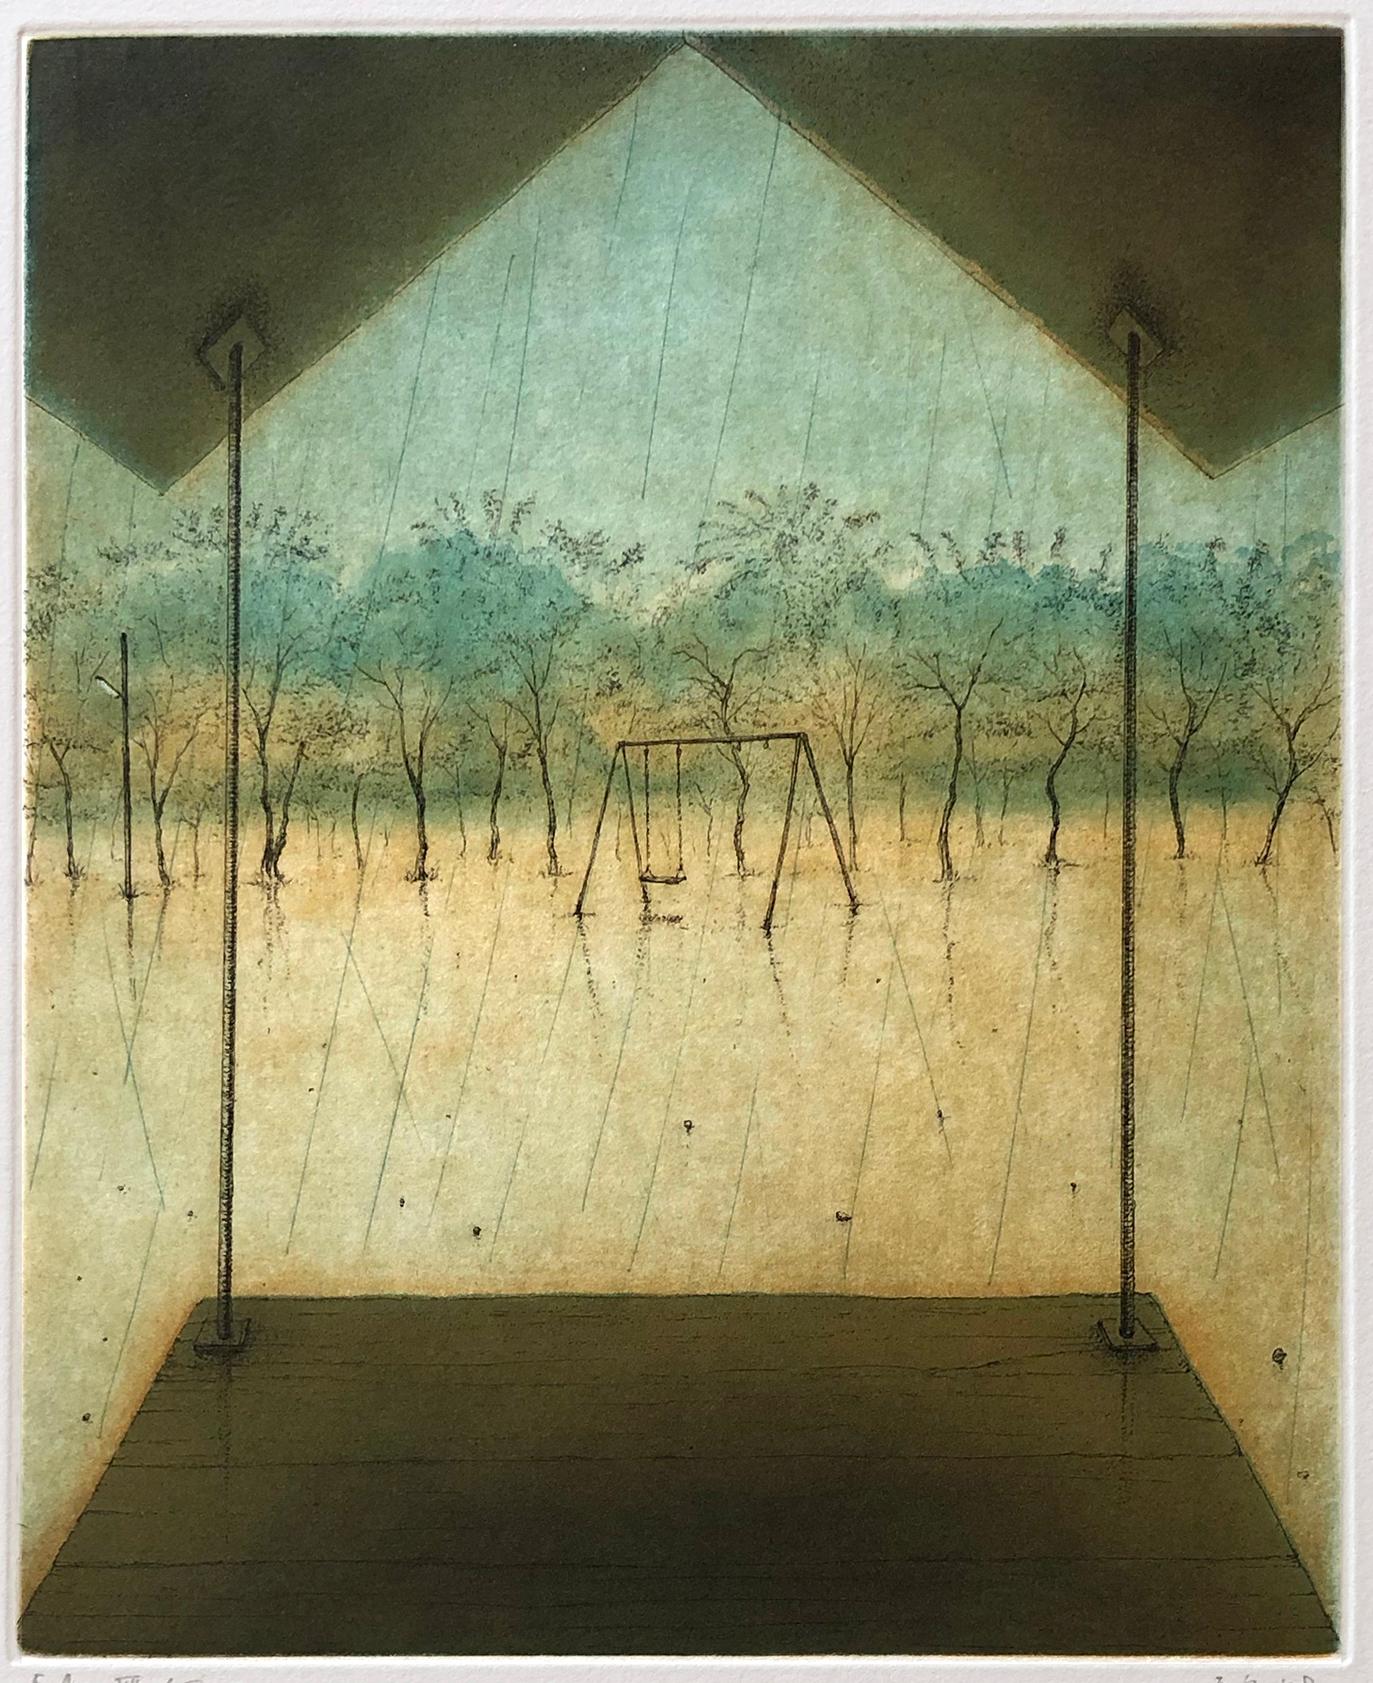 Signed artist proof, VII/X. Image of a swing set in a rainy landscape. Shiraishi's prints often have a dreamy or surrealistic feeling.

Mitsuo Shiraishi is a Japanese painter and printmaker. He was born in Tokyo in 1969, but now works and lives in